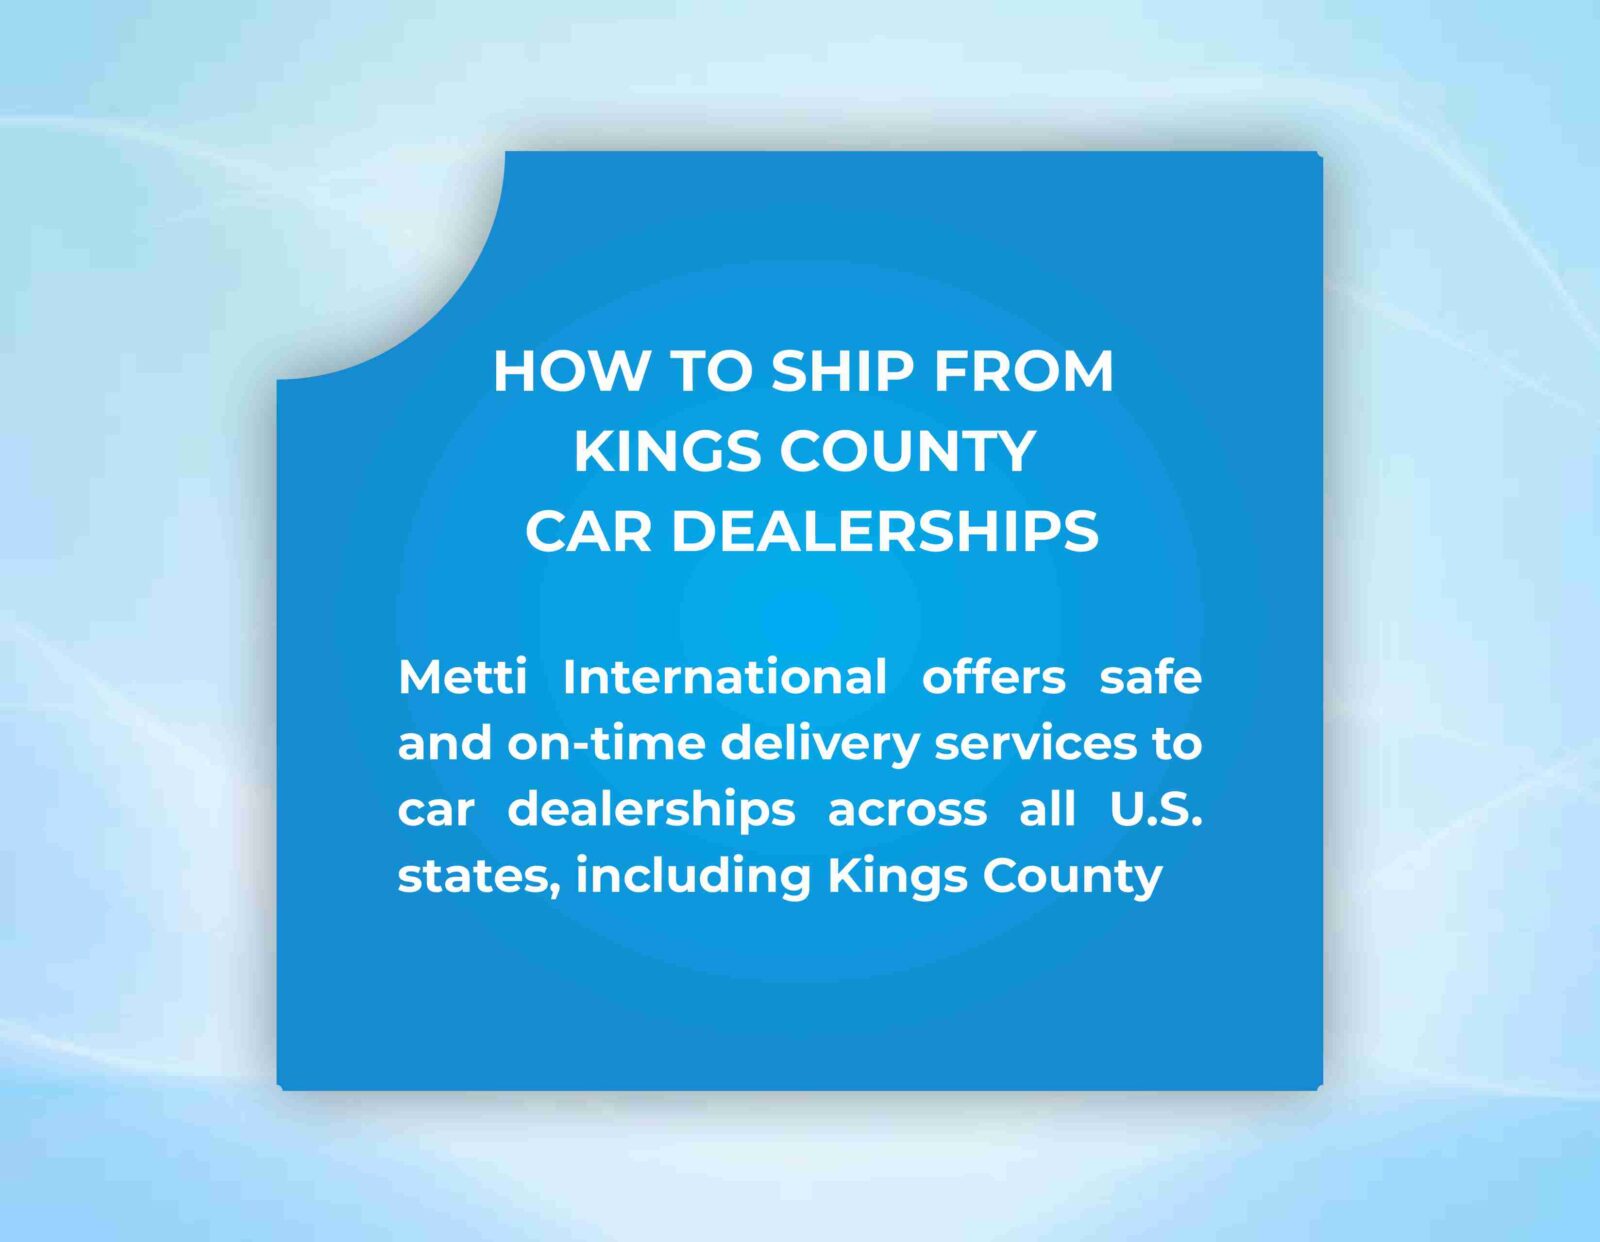 Kings-County-Auto-Transport